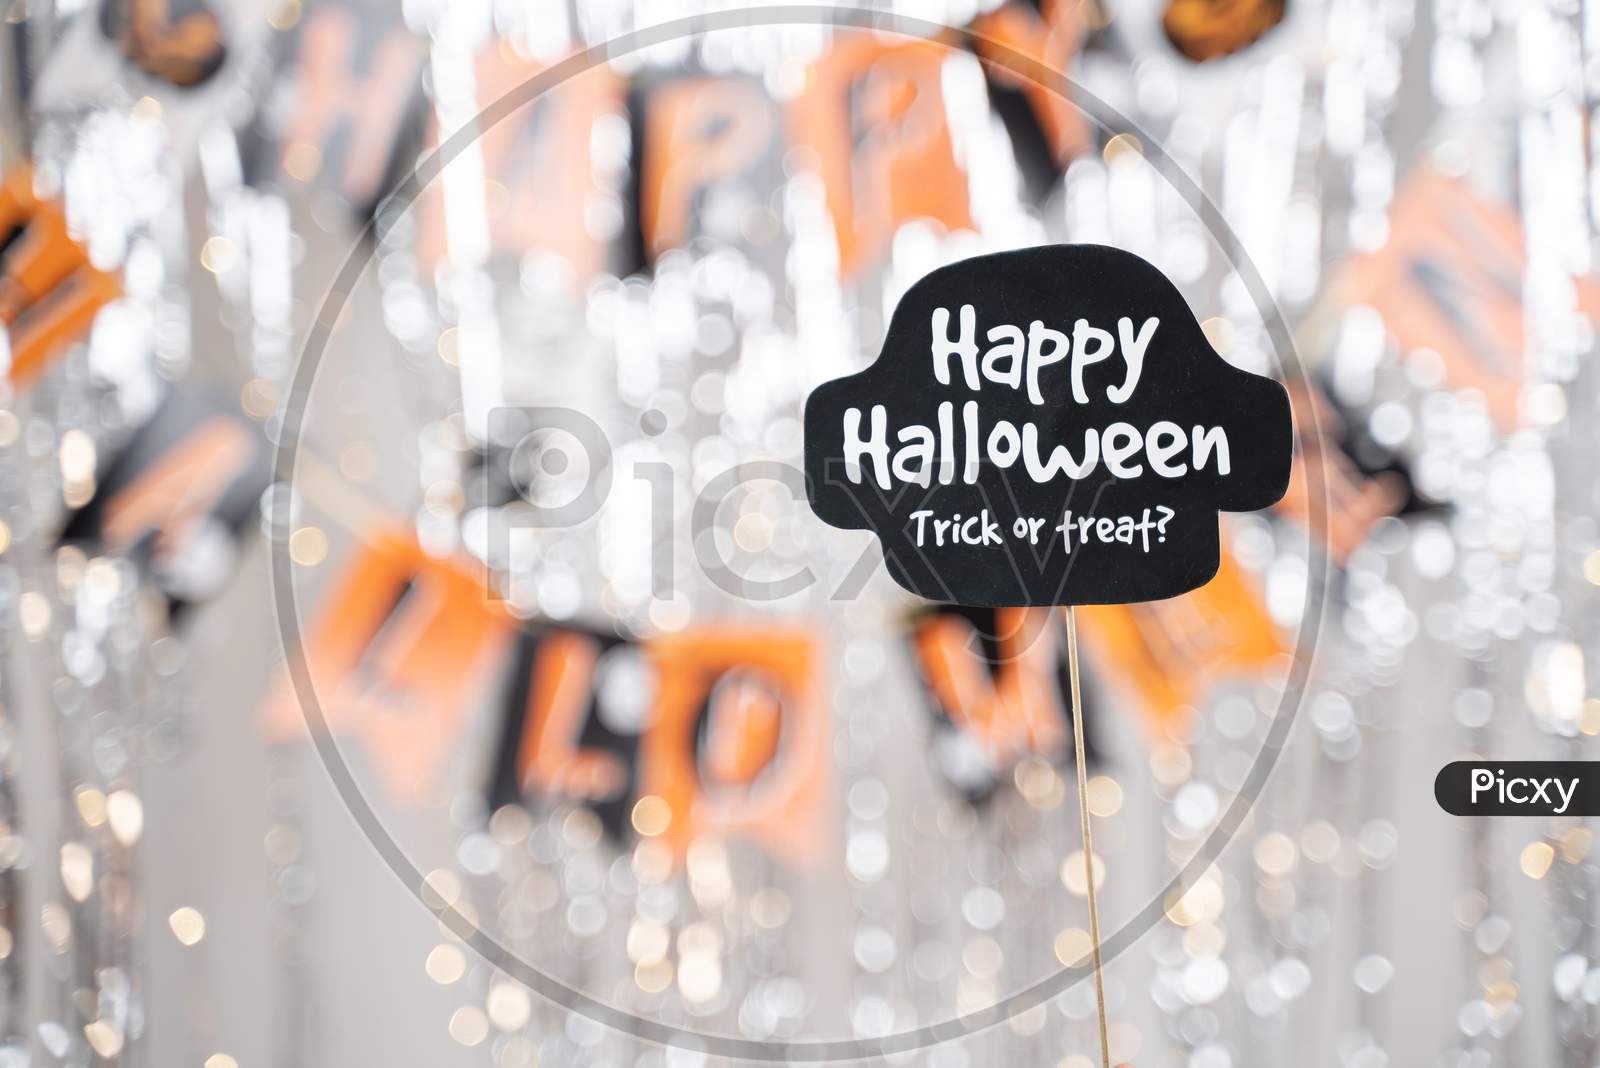 Happy Halloween And Trick Or Treat Signage Booth Prop On Decorated Background - Concept Of Holiday And Halloween Festival.